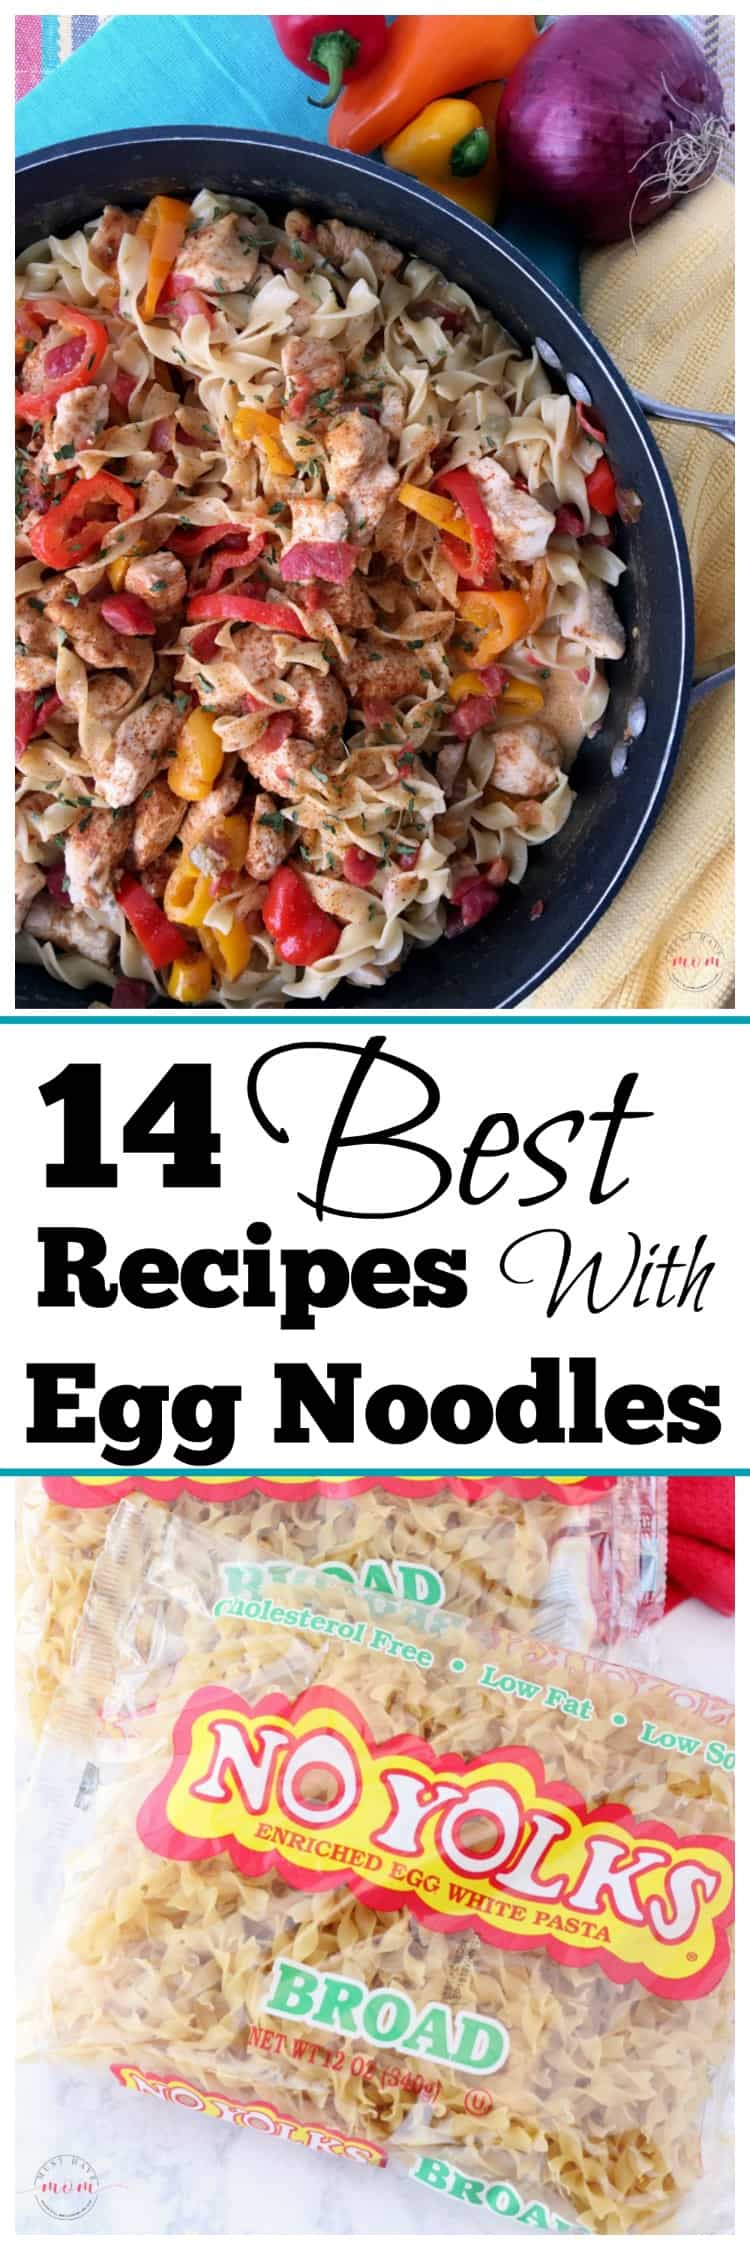 Best recipes with egg noodles! Find the perfect dinner idea or quick recipe here.